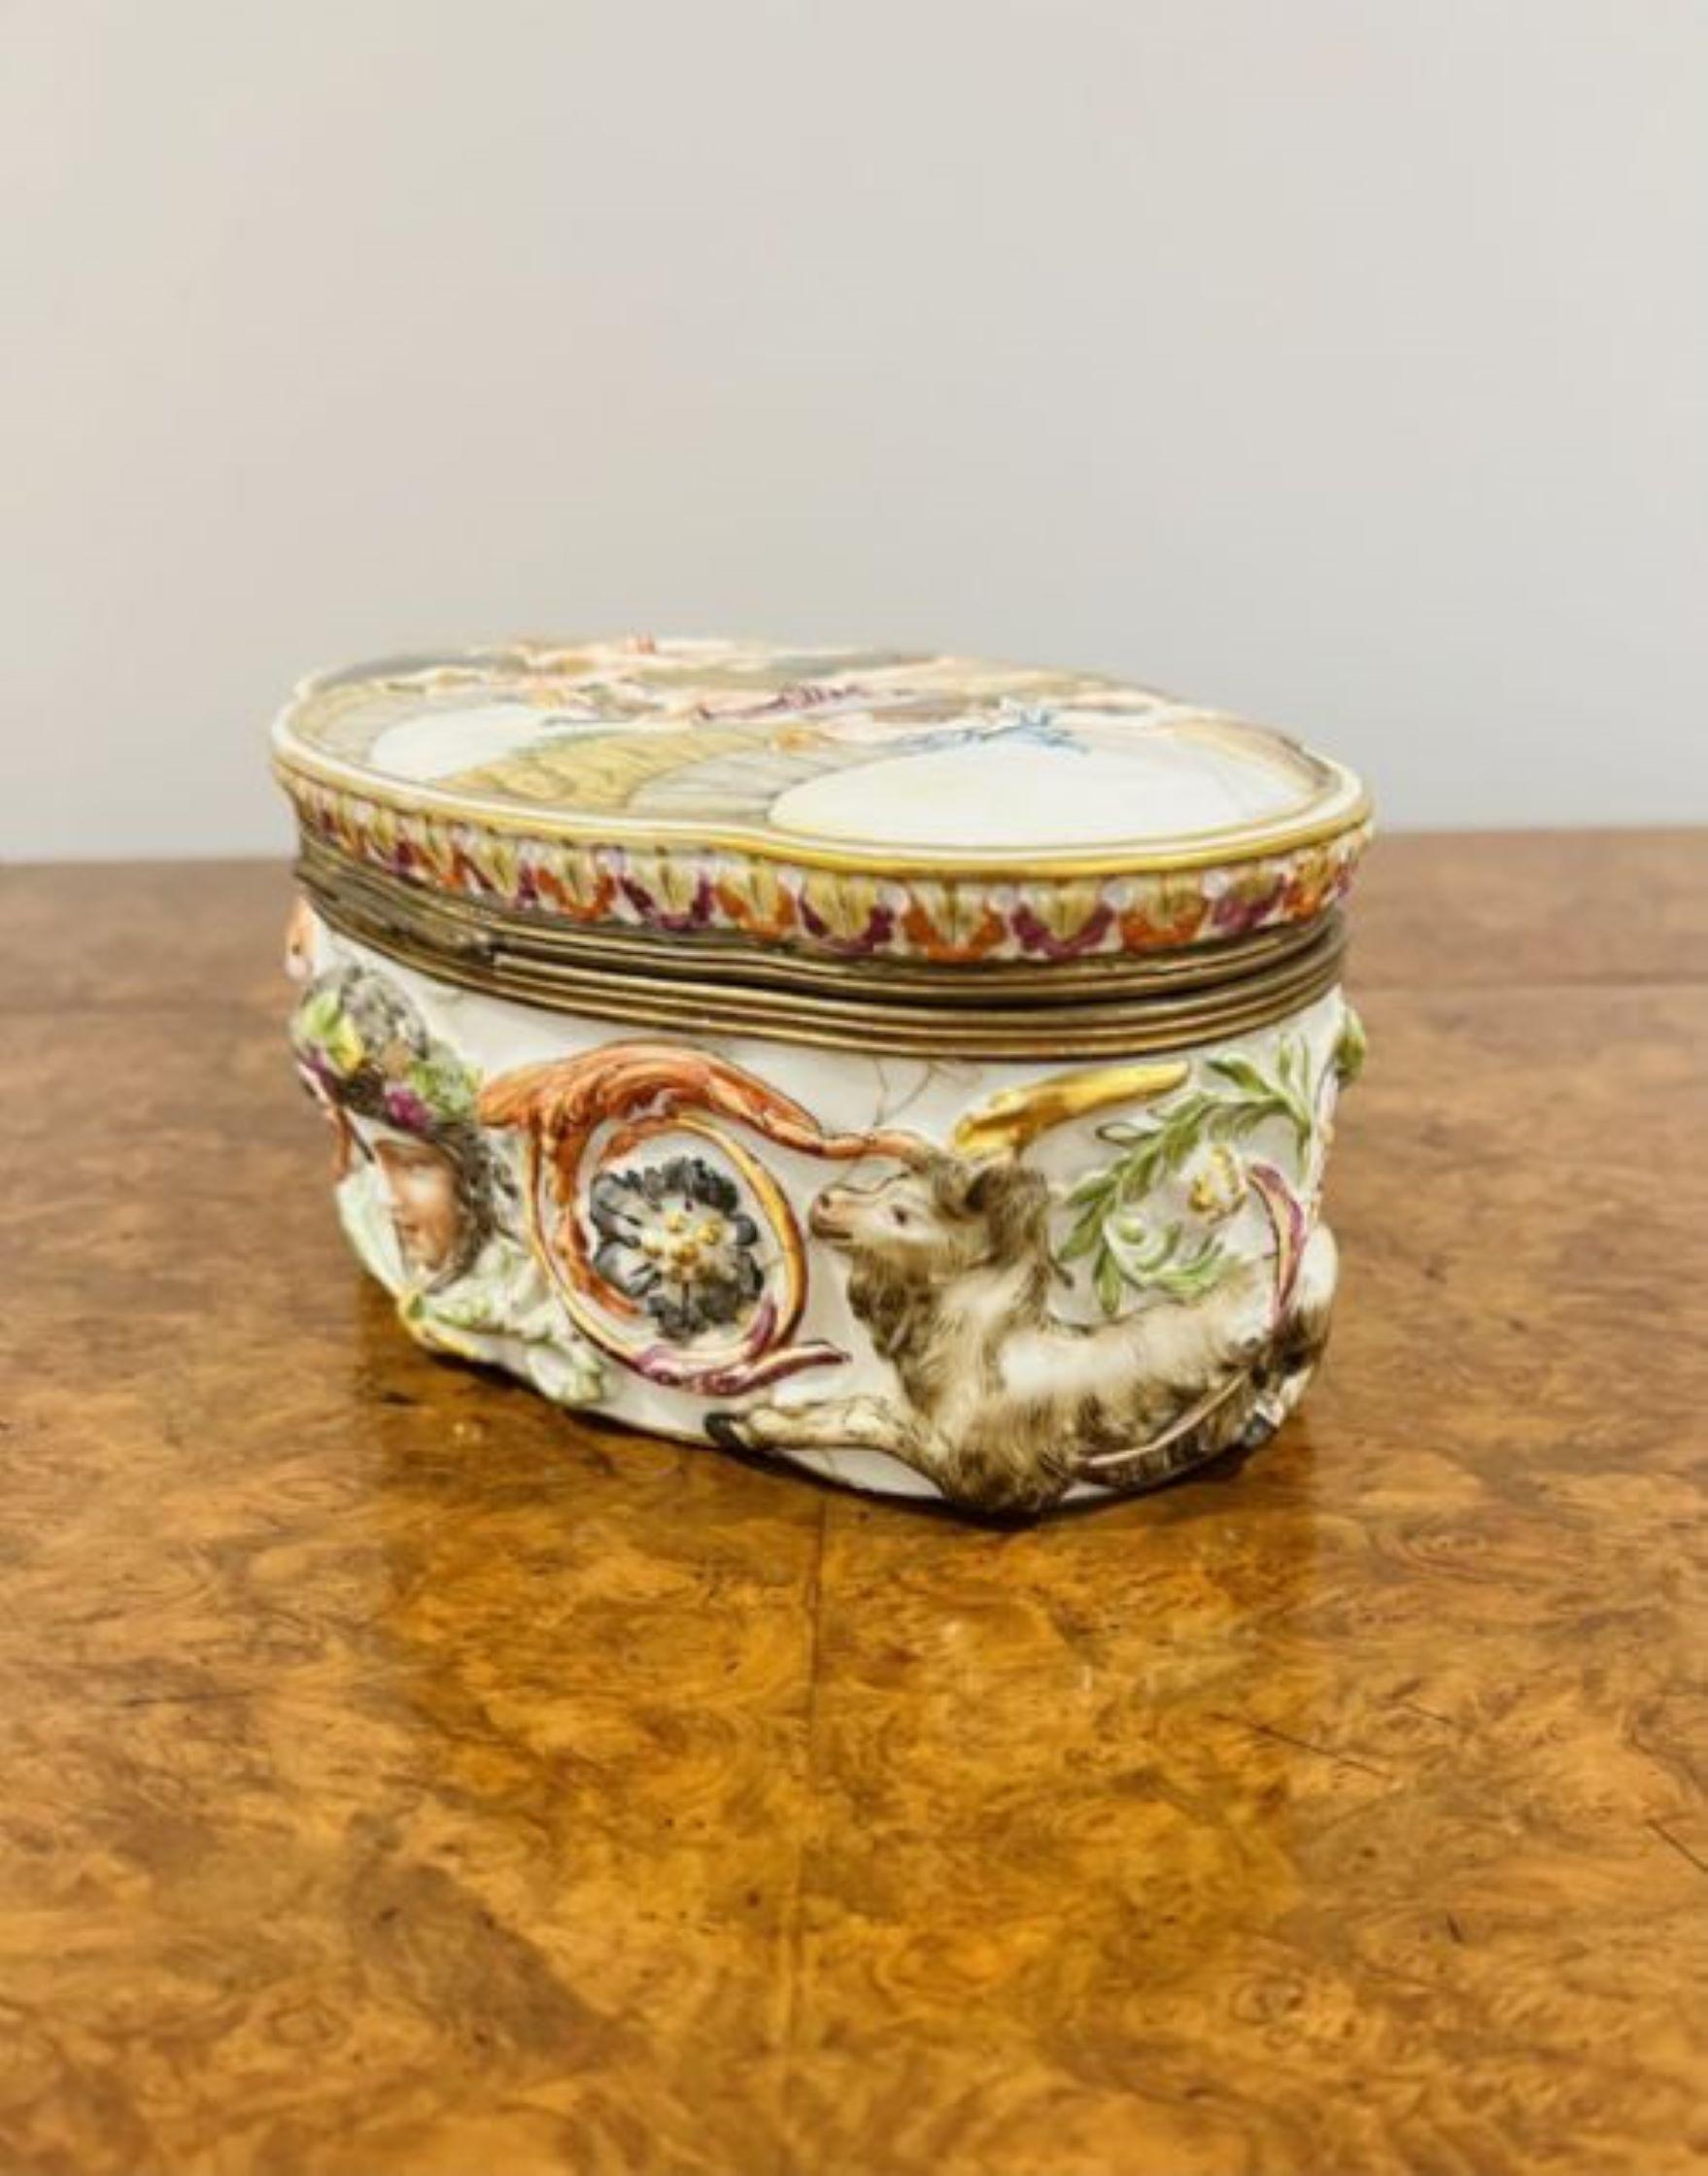 Quality antique Victorian Italian Capodimonte porcelain table casket having a quality antique Victorian Capodimonte porcelain table casket with a clasp to the front opening to reveal one compartment with red velvet interior, having a classical scene